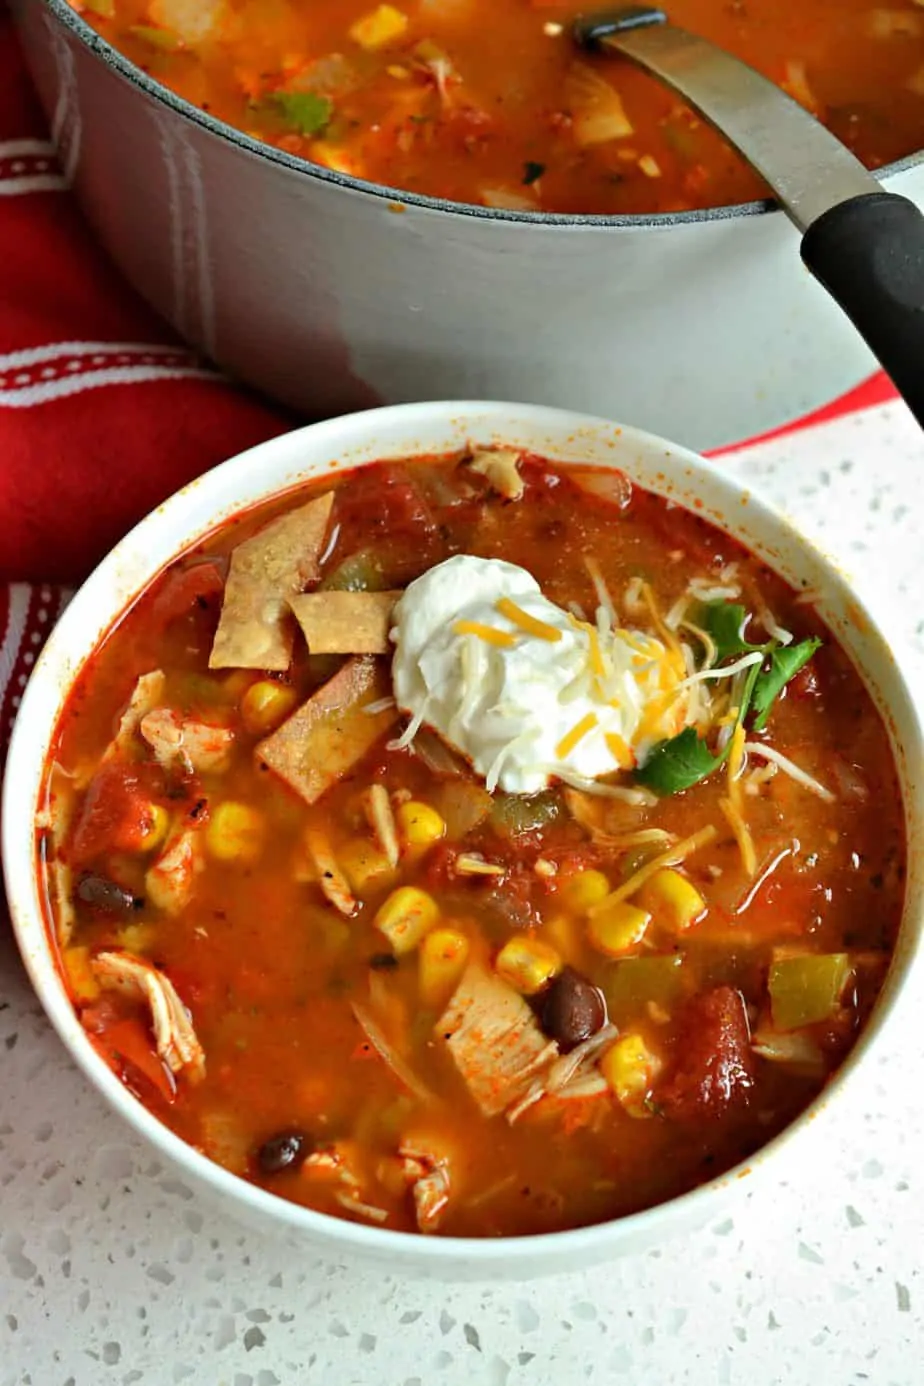 This delicious yet simple Chicken Taco Soup is made in less than thirty minutes using already cooked rotisserie chicken.